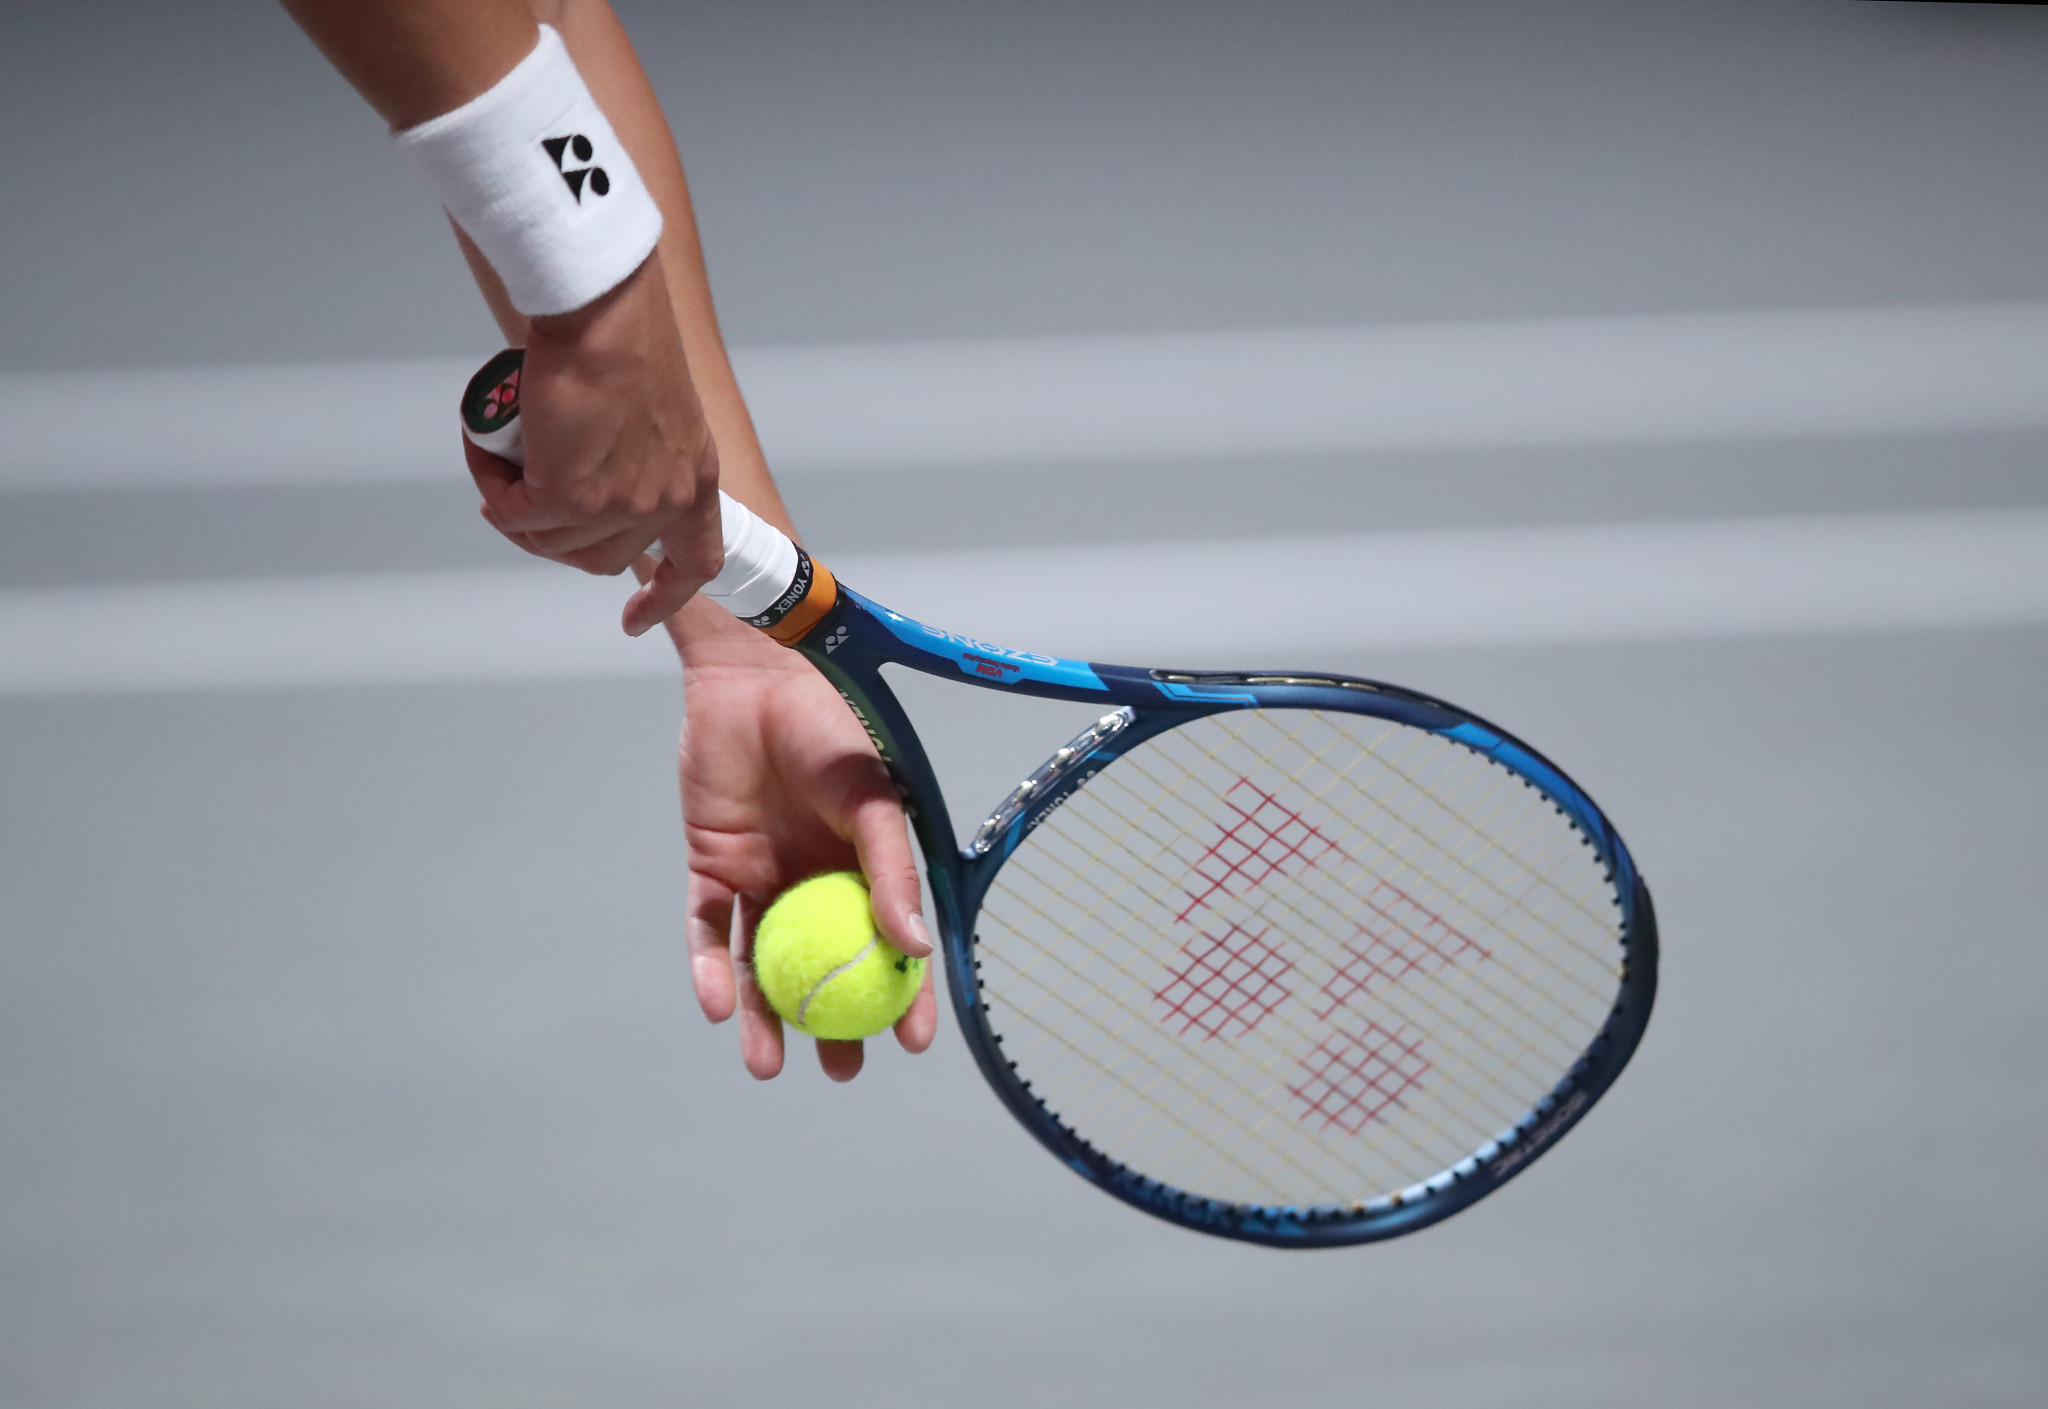 The ITIA has banned two tennis players for match-fixing. GETTY IMAGES